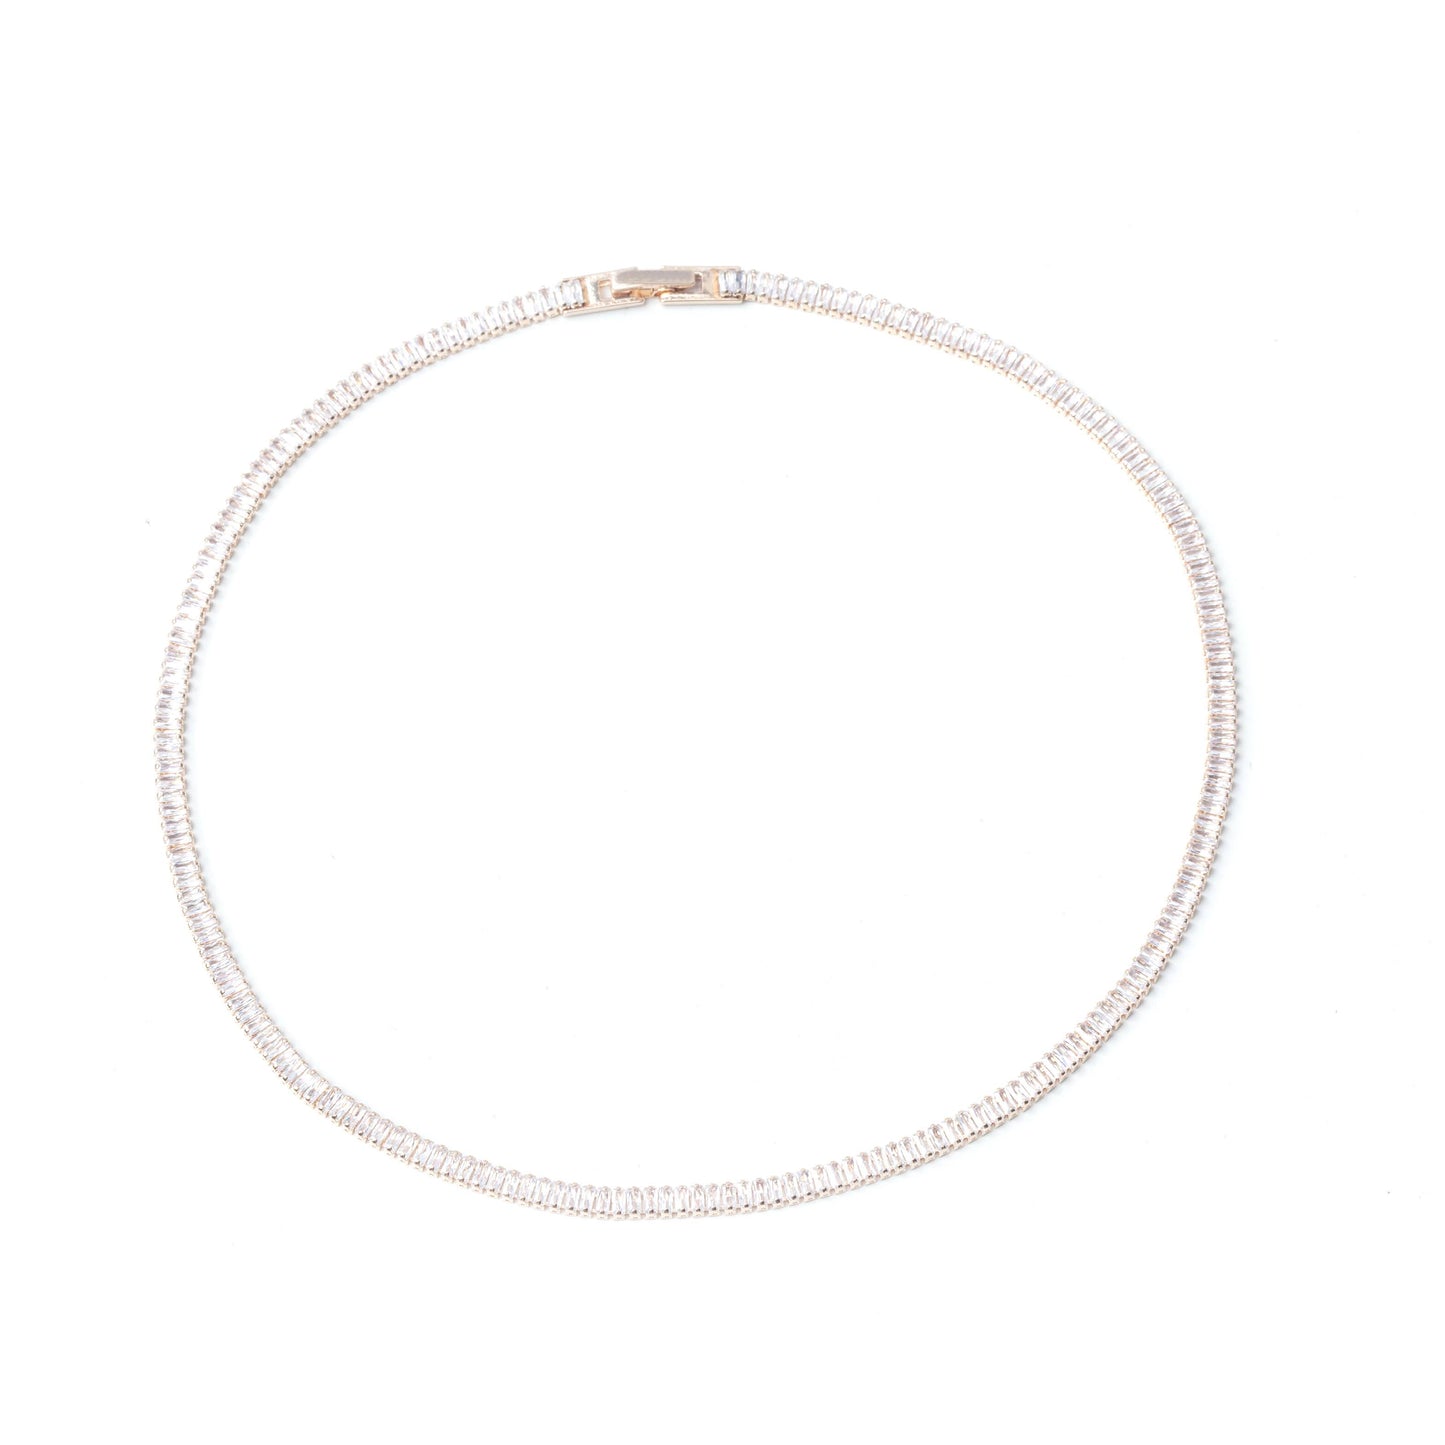 Malleable baguette tennis necklace in 18k Gold plating